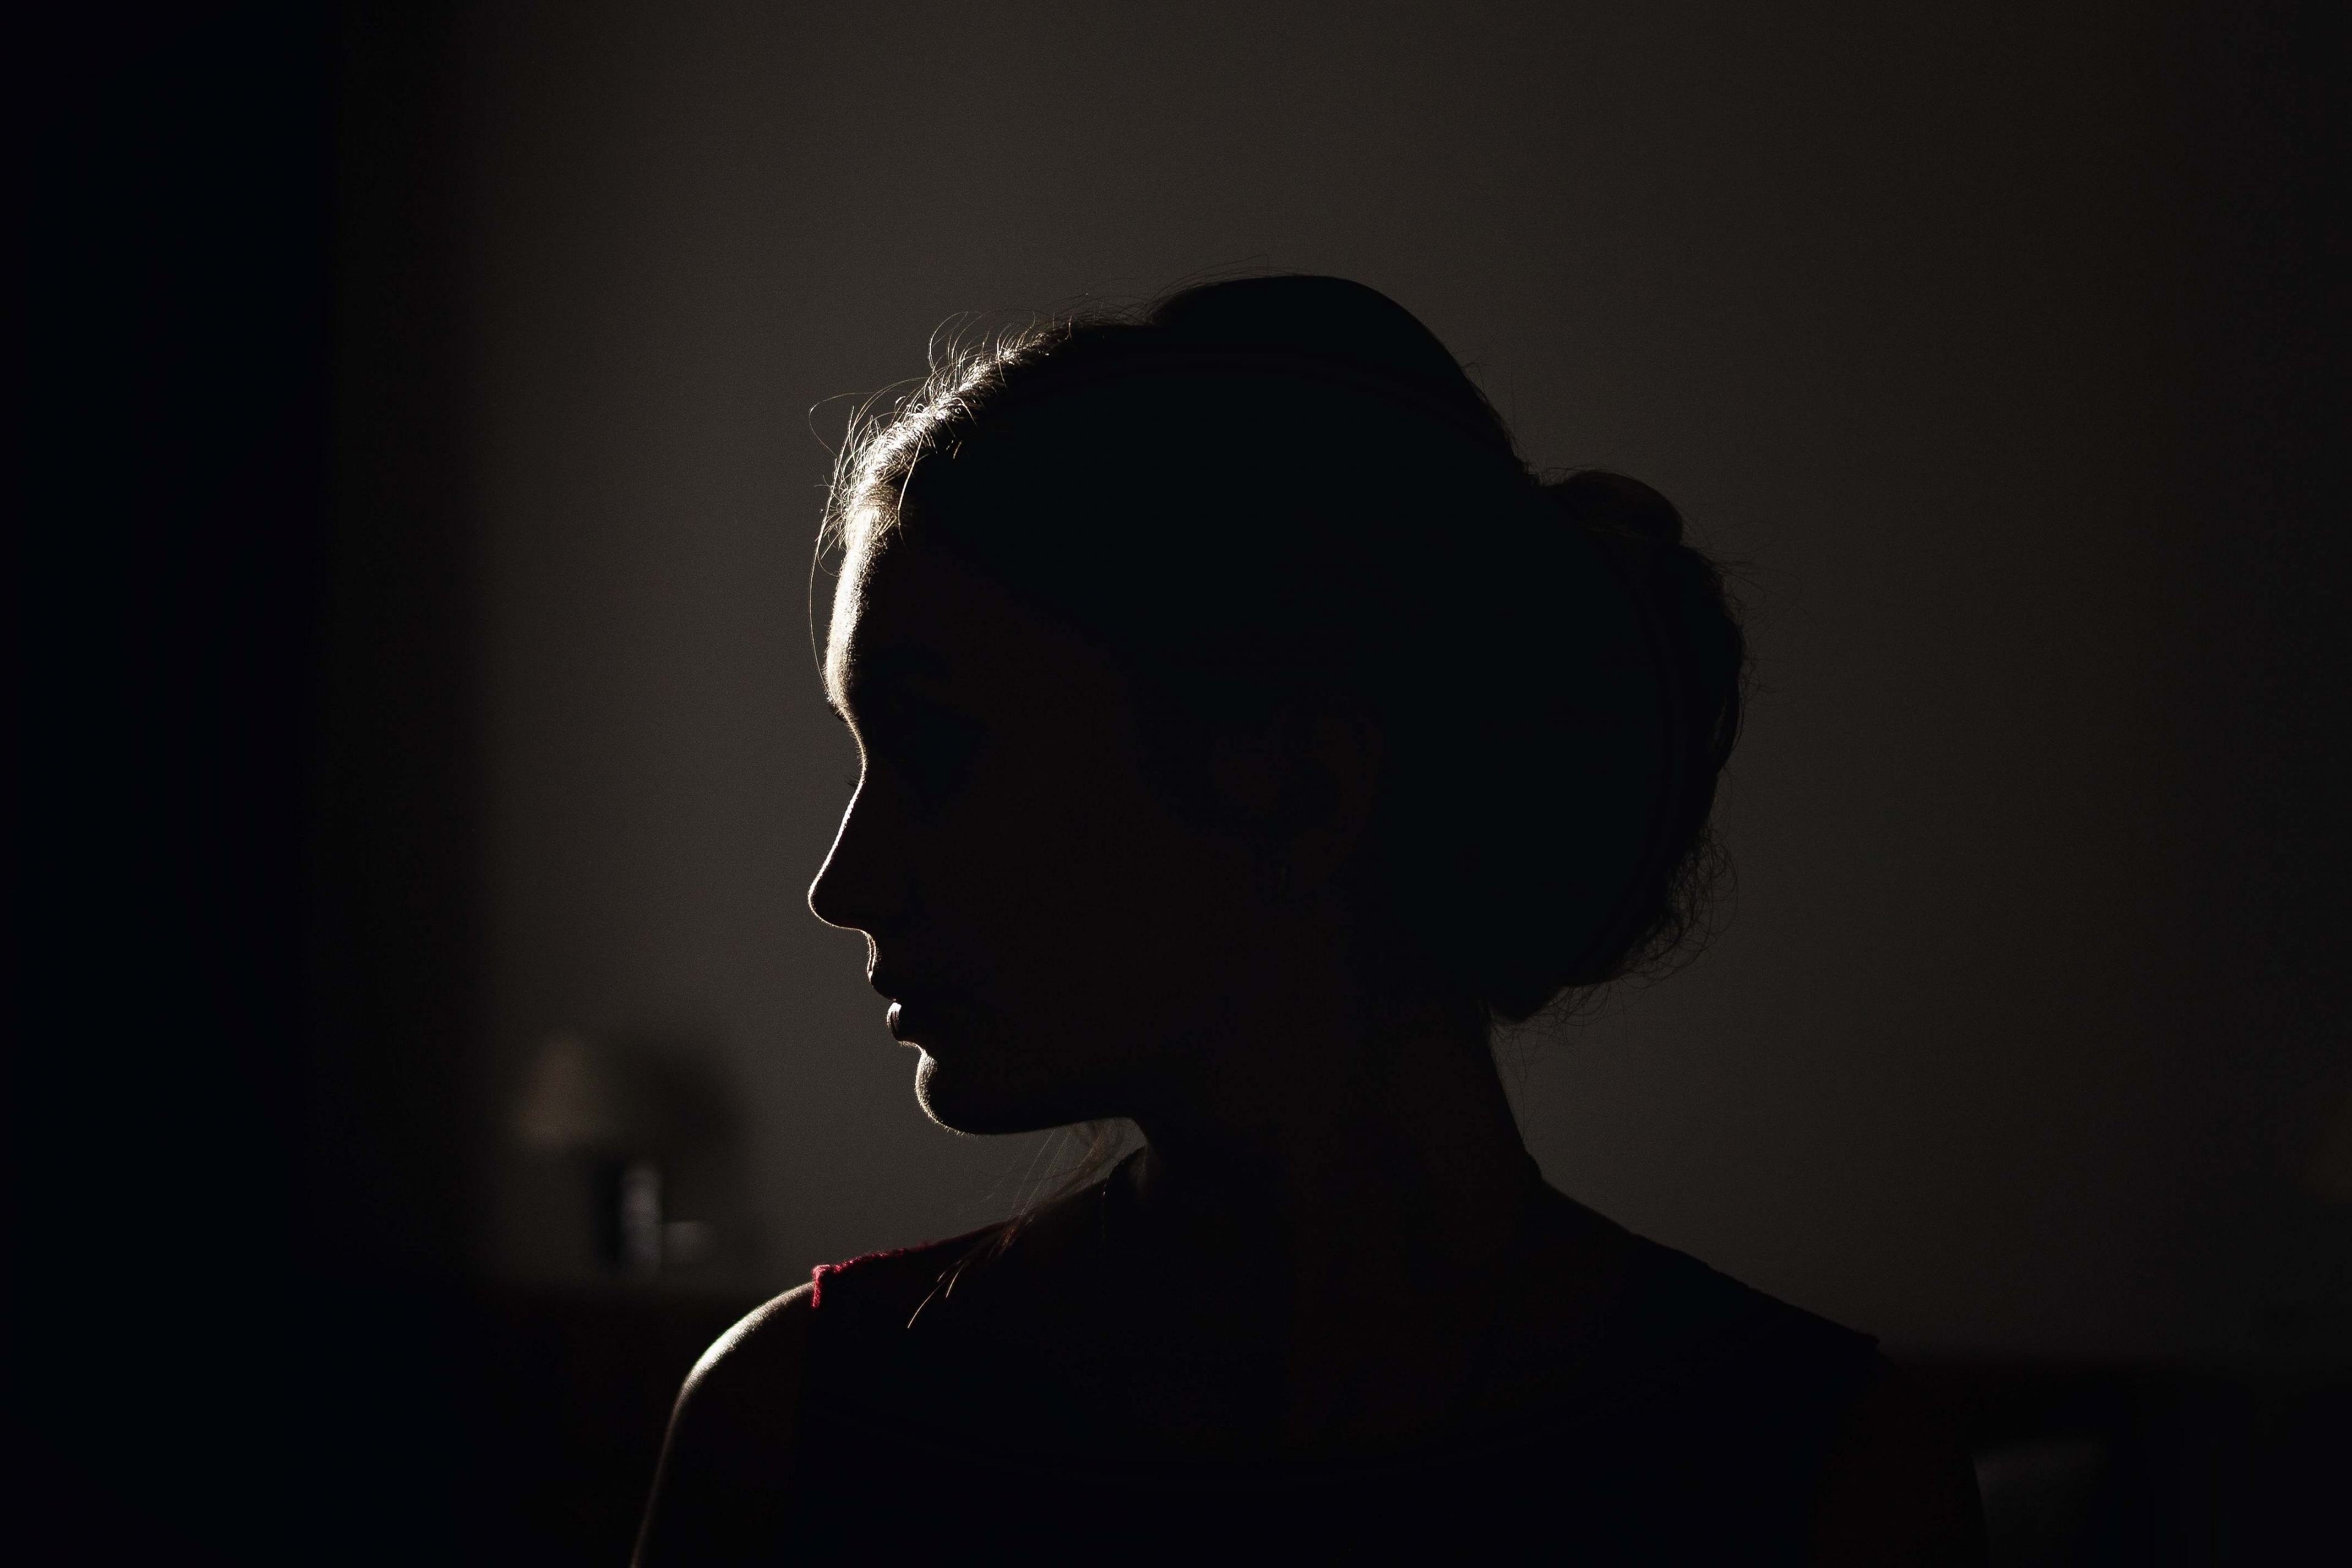 Obrázek: silhouette-silhouette-of-woman-person-person-image-1